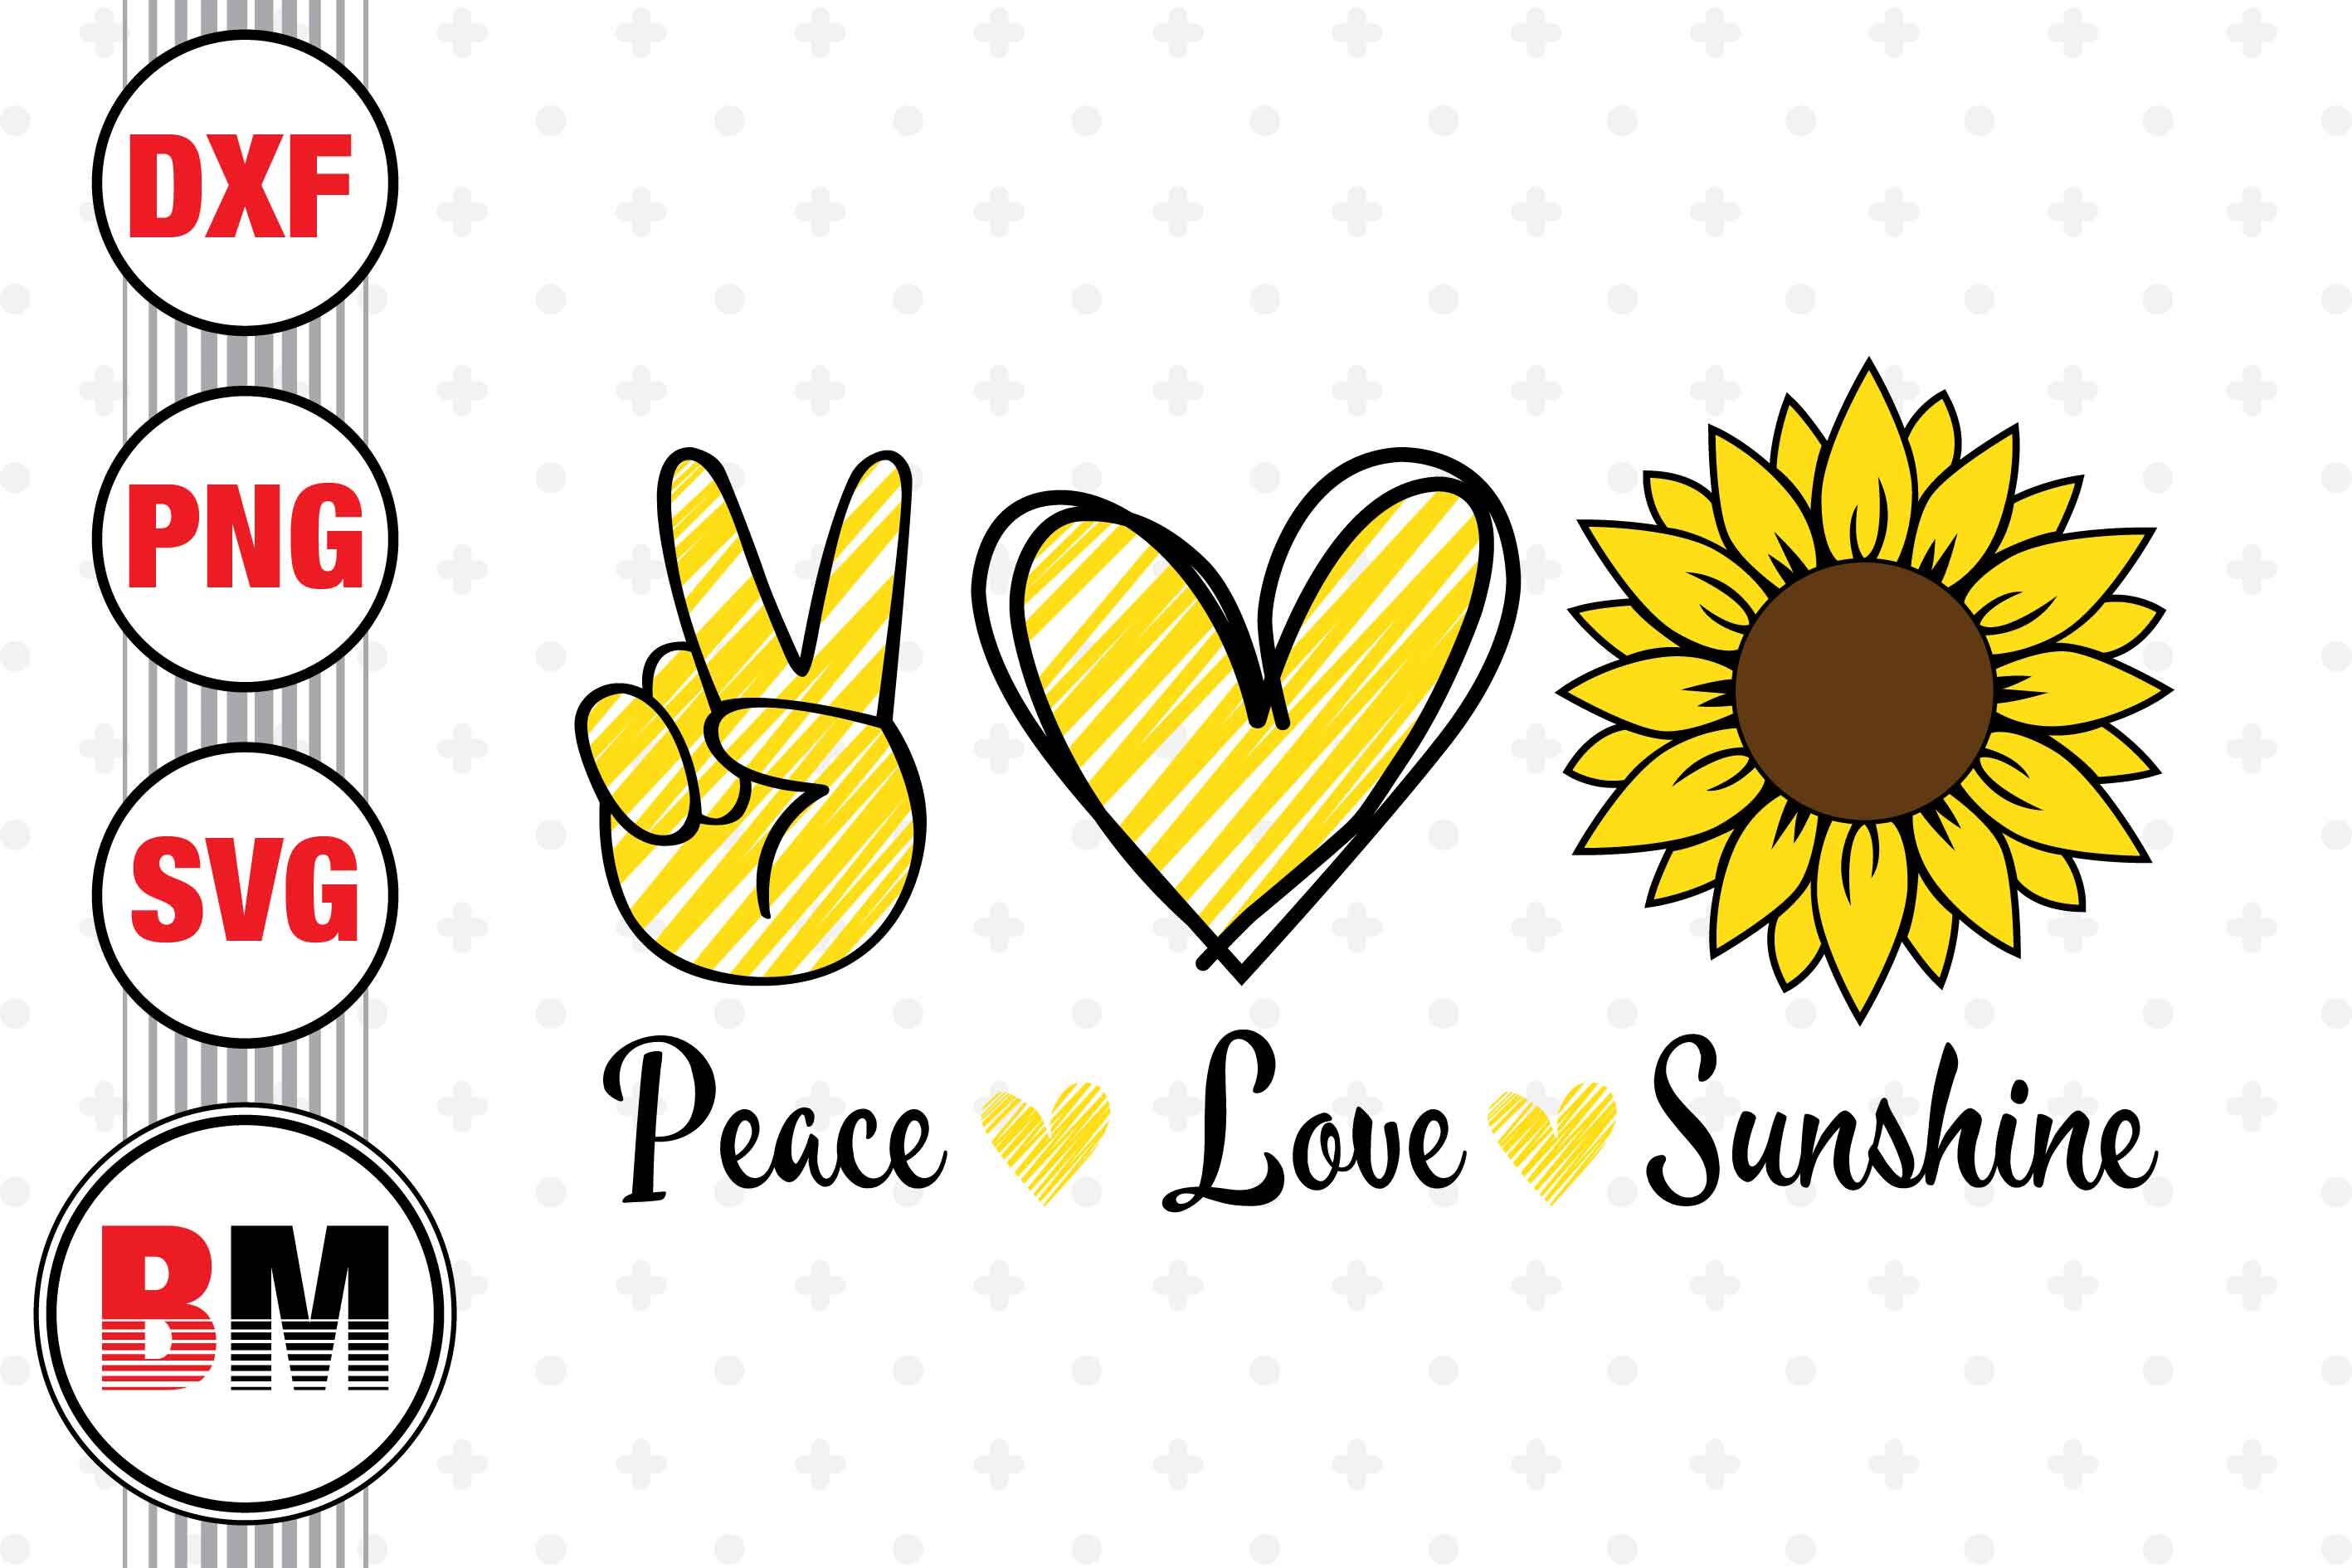 Peace and Love - Instant Digital Download - svg, png, dxf, and eps files  included! Peace Hand, Peace Sign, Signal, Heart